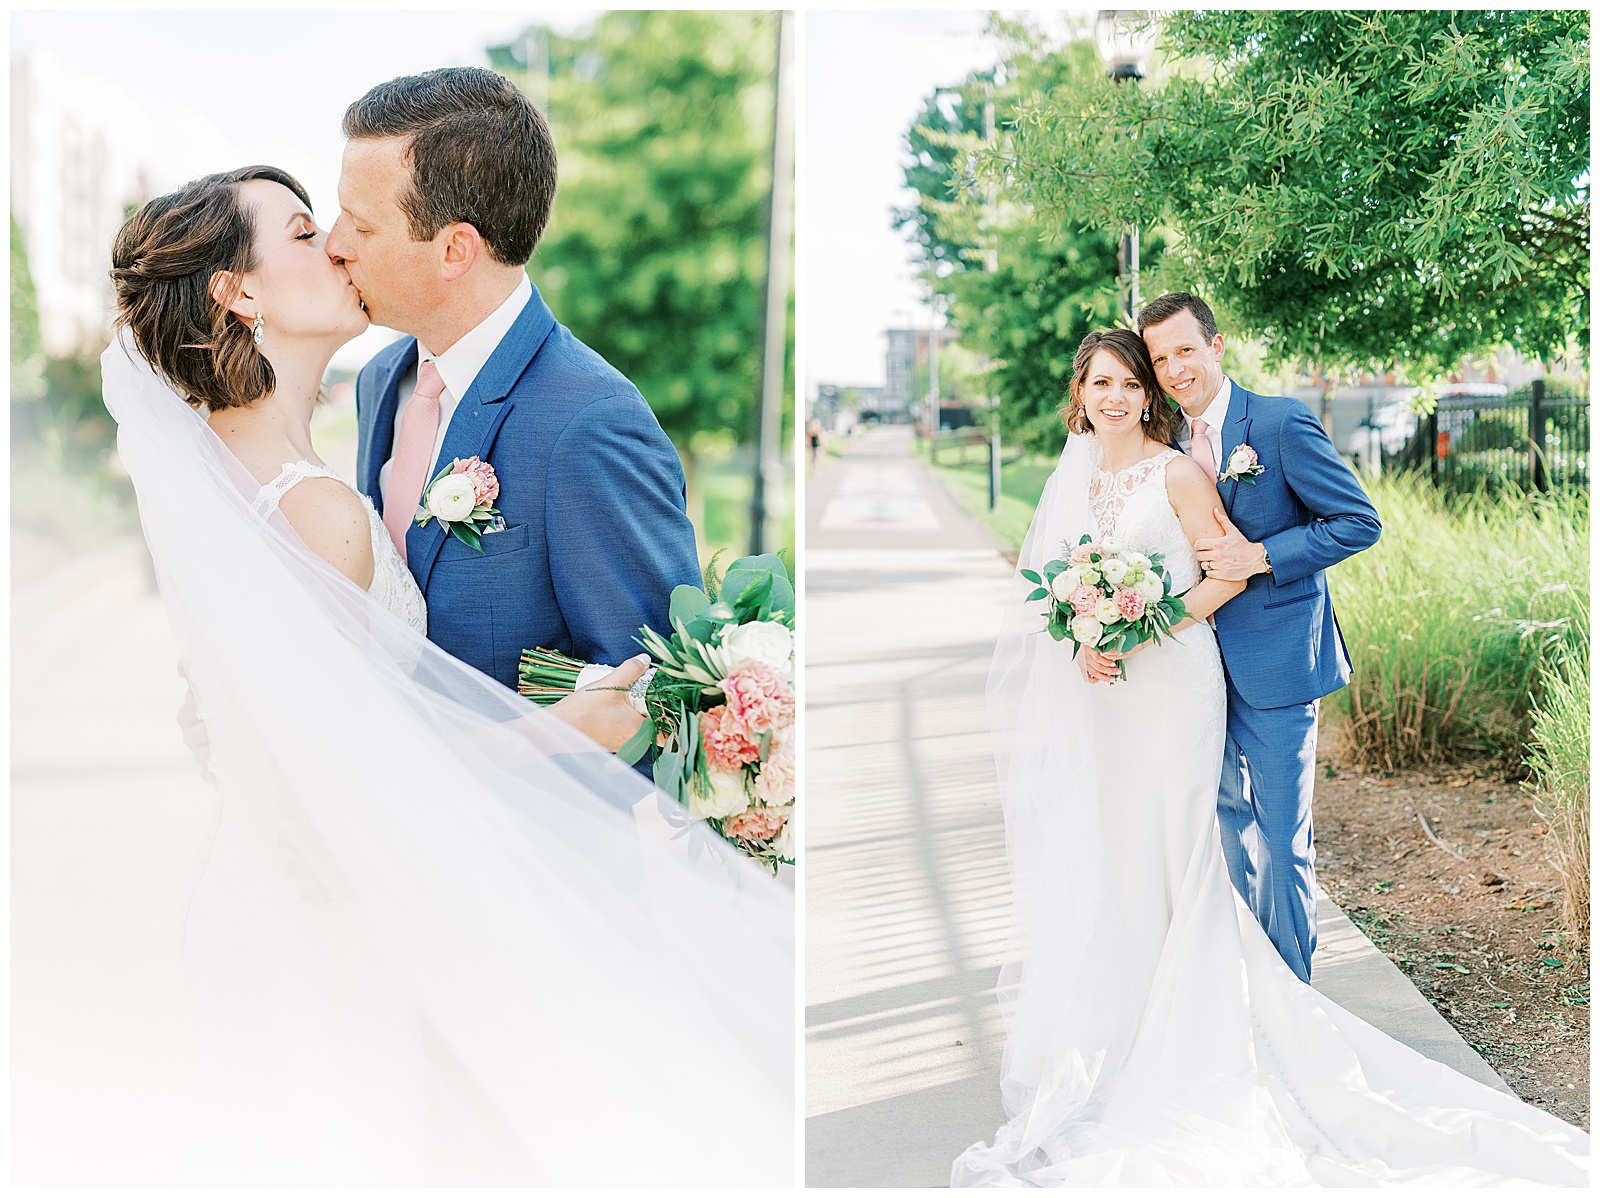 gorgeous veil shots from outdoor summer bride groom portraits on city sidewalk of short brown haired bride in lace dress with long train and navy blue suited groom